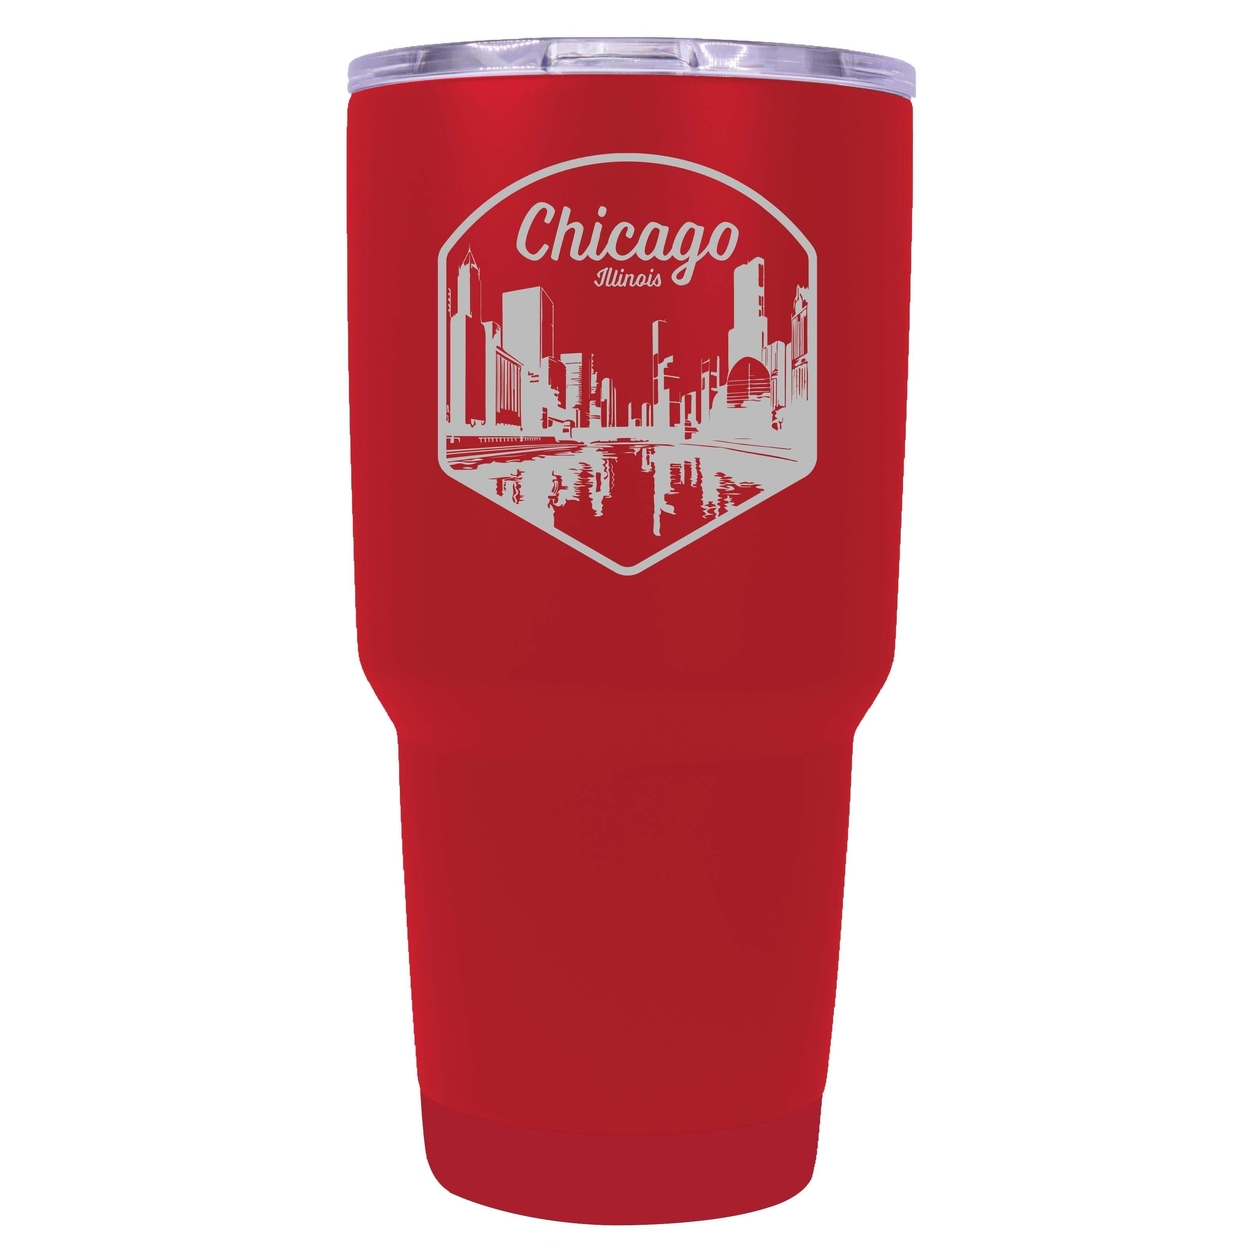 Chicago Illinois Souvenir 24 Oz Engraved Insulated Tumbler - Red,,4-Pack